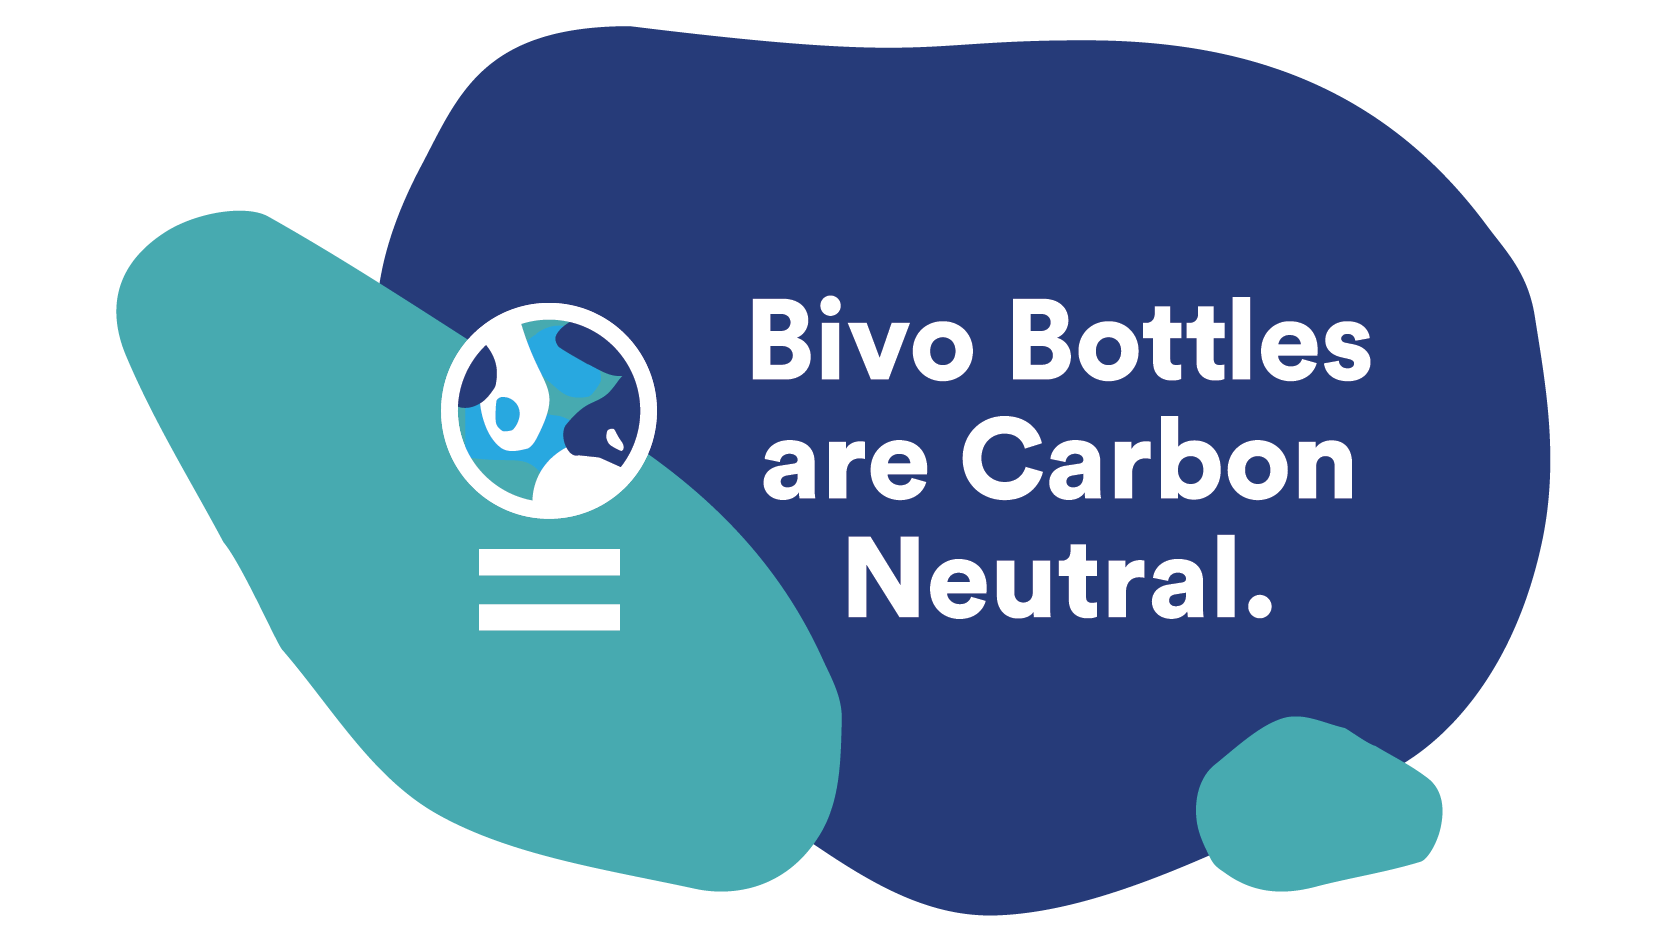 All Bivo Bottles are Carbon Neutral